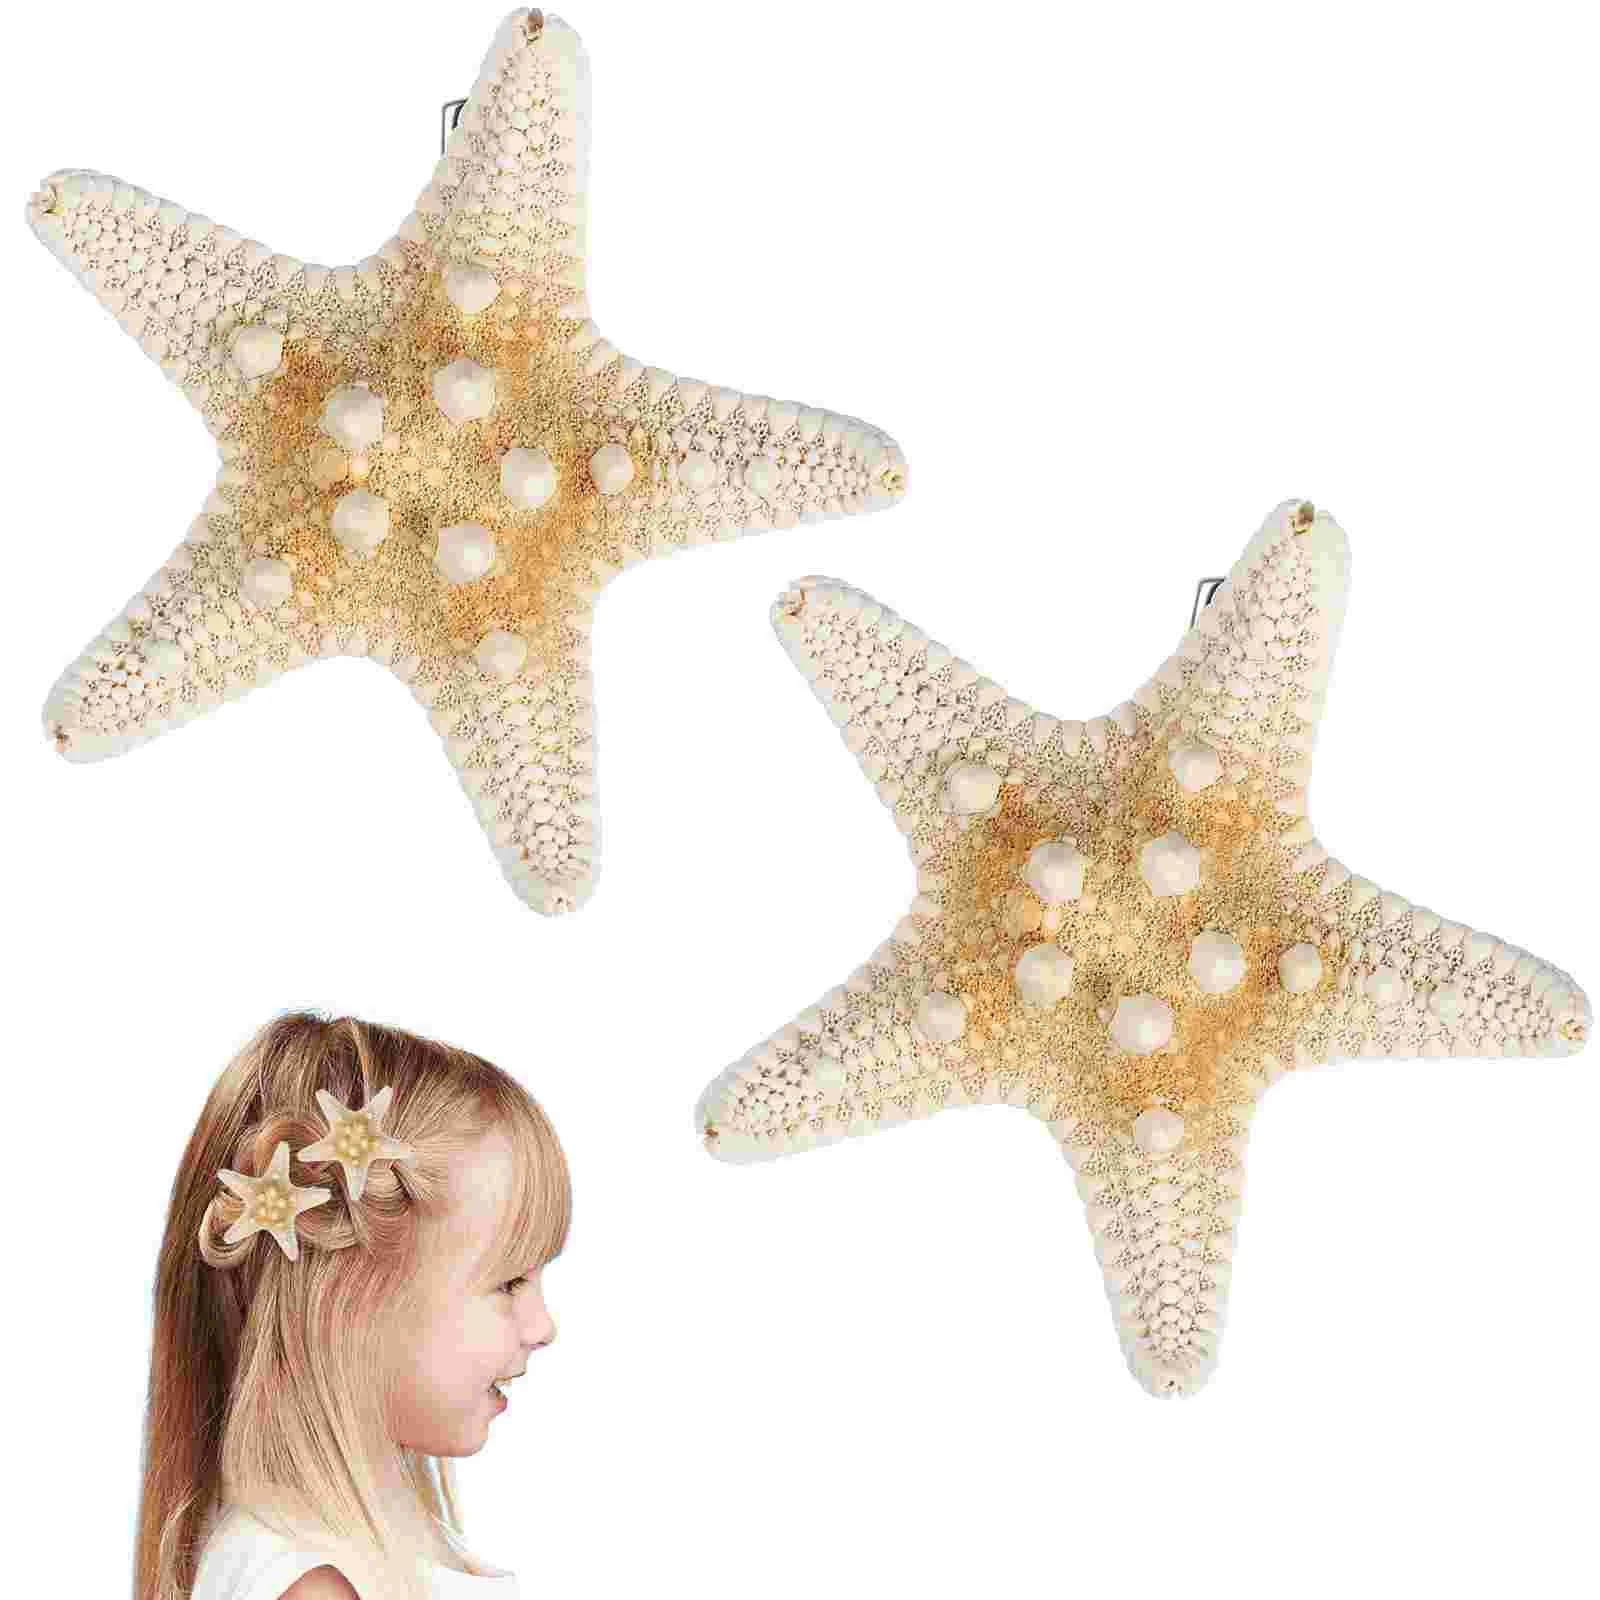 

2 Pcs Frcolor Handmade Natural Starfish Hair Clips 2pcs/pack Small Clamps Conch Women Five-pointed Hairpin Accessories